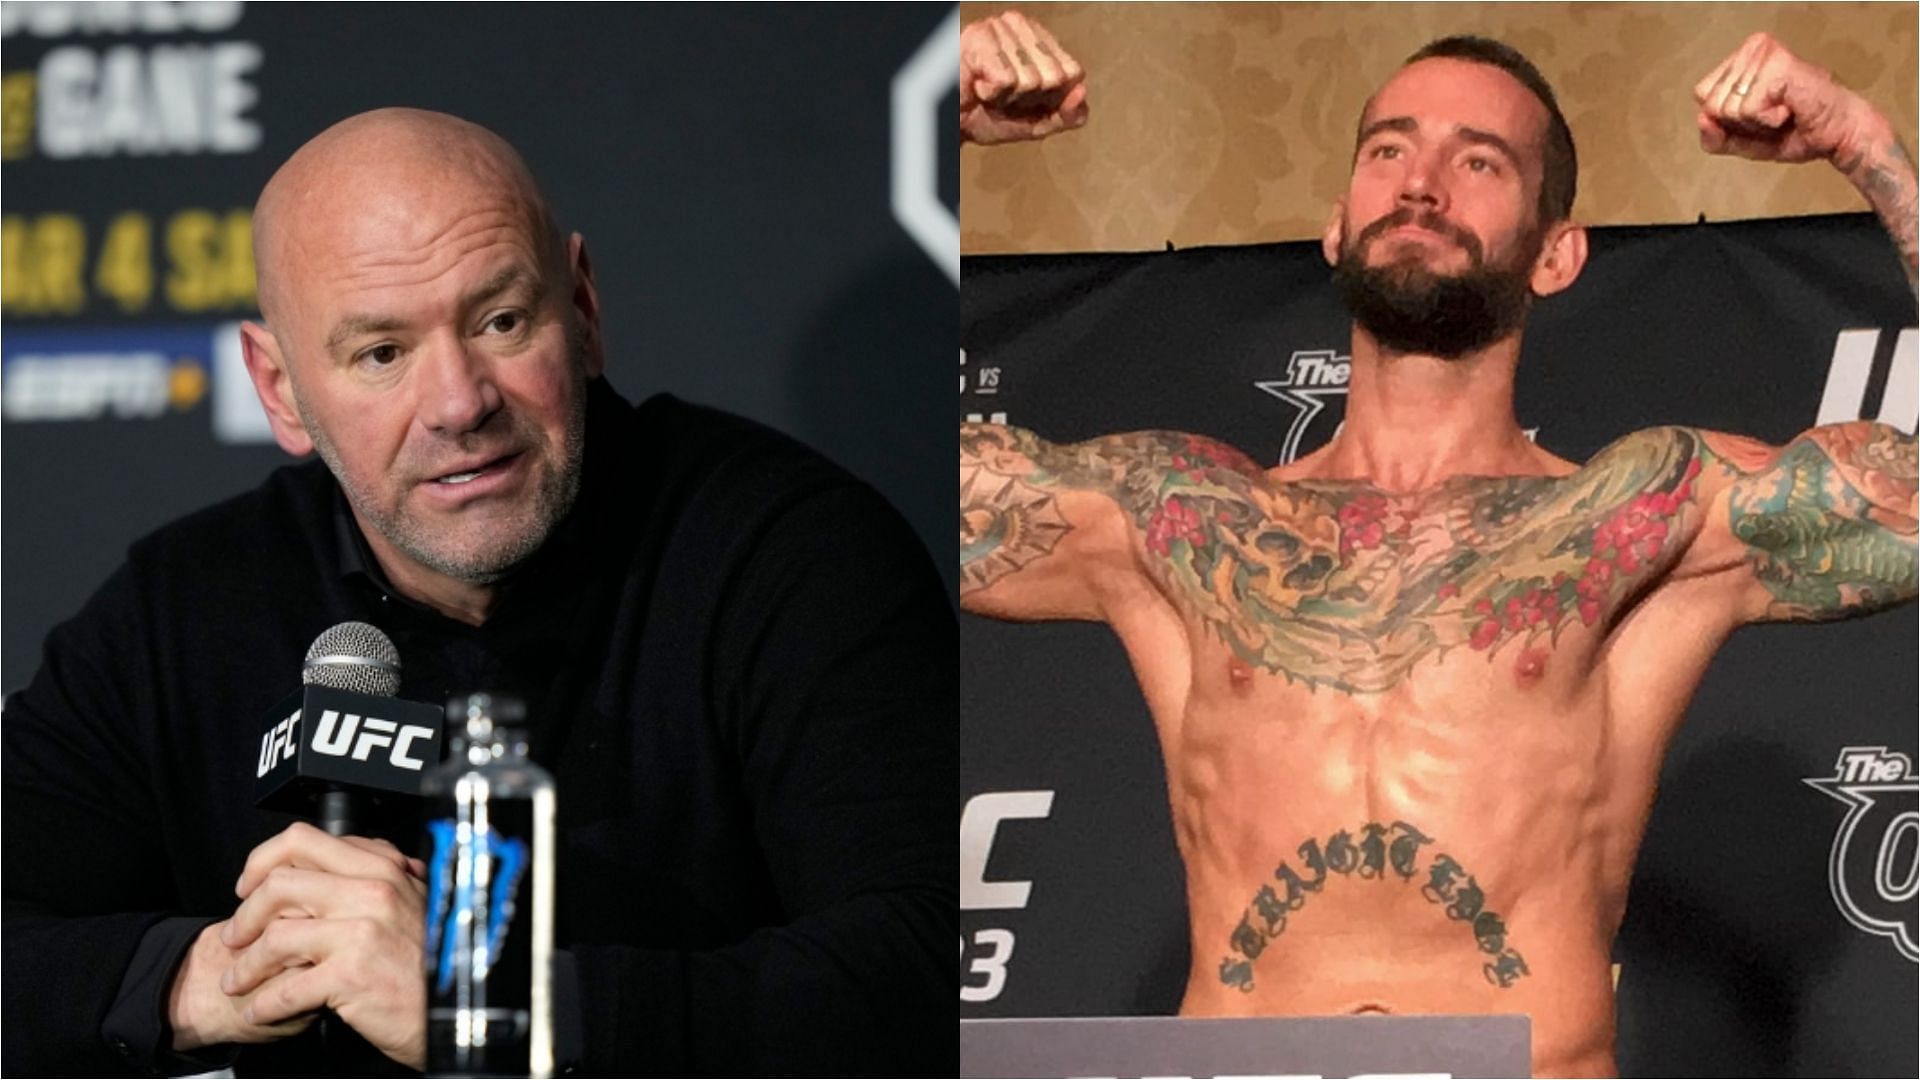 WWE star CM Punk had a good relationship with Dana White